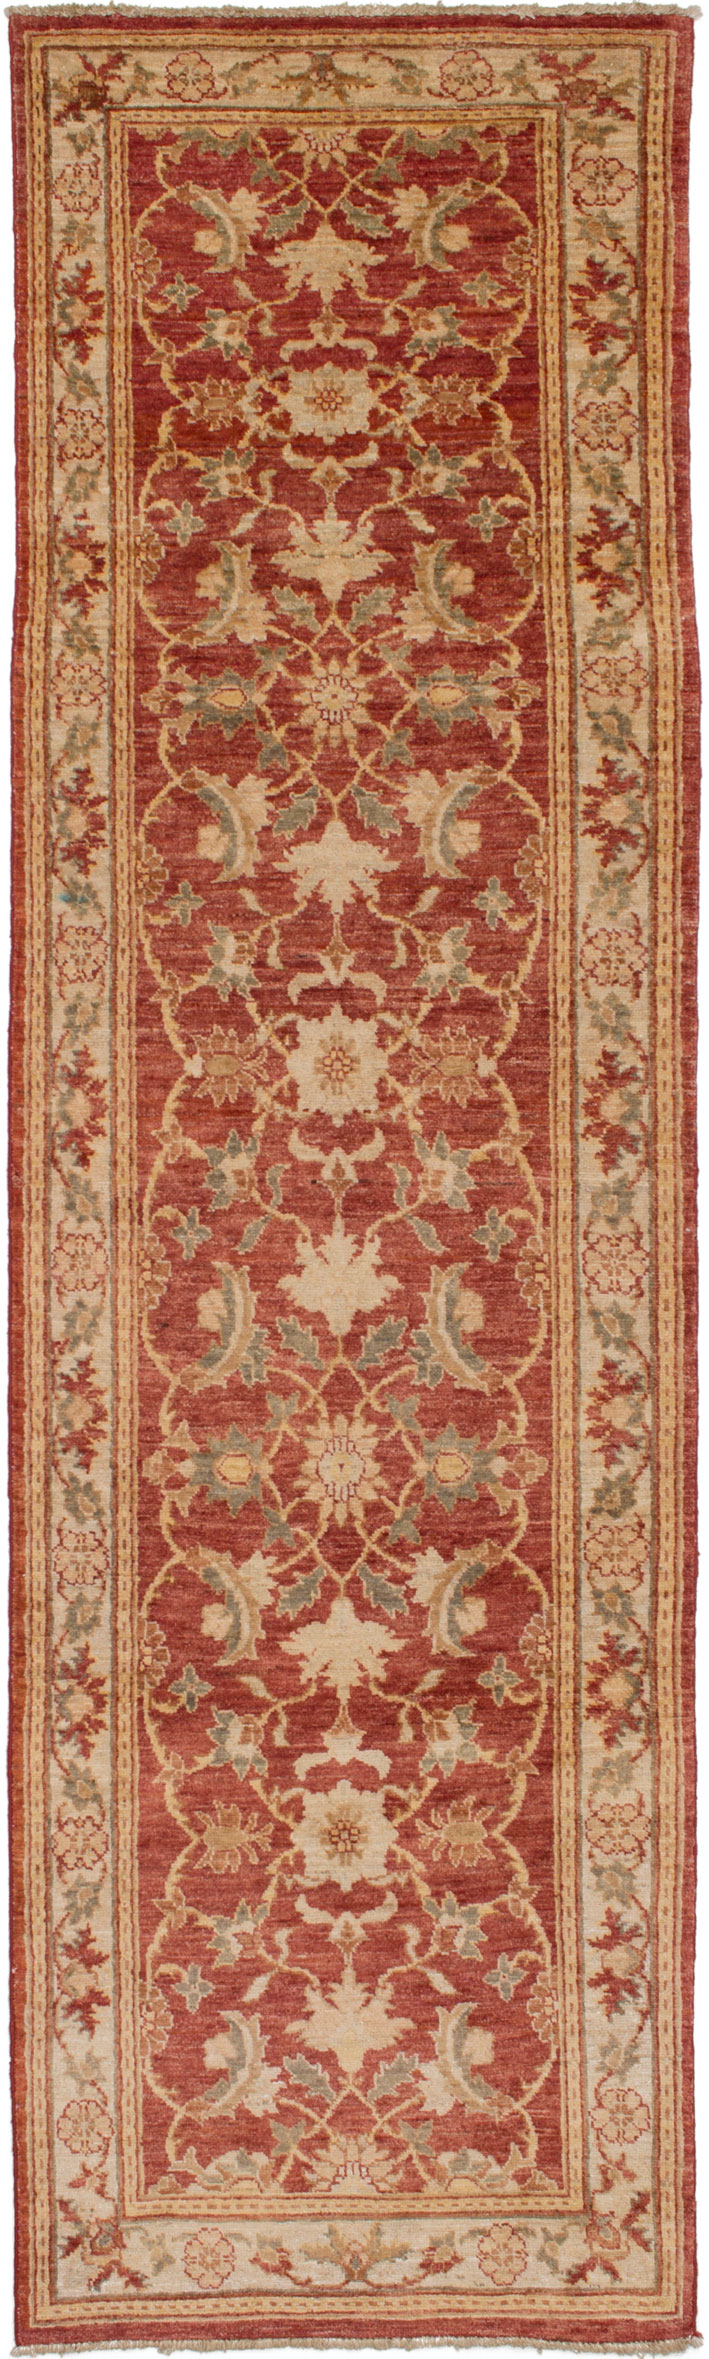 Hand-knotted Chobi Finest Red Wool Rug 2'7" x 8'11" Size: 2'7" x 8'11"  